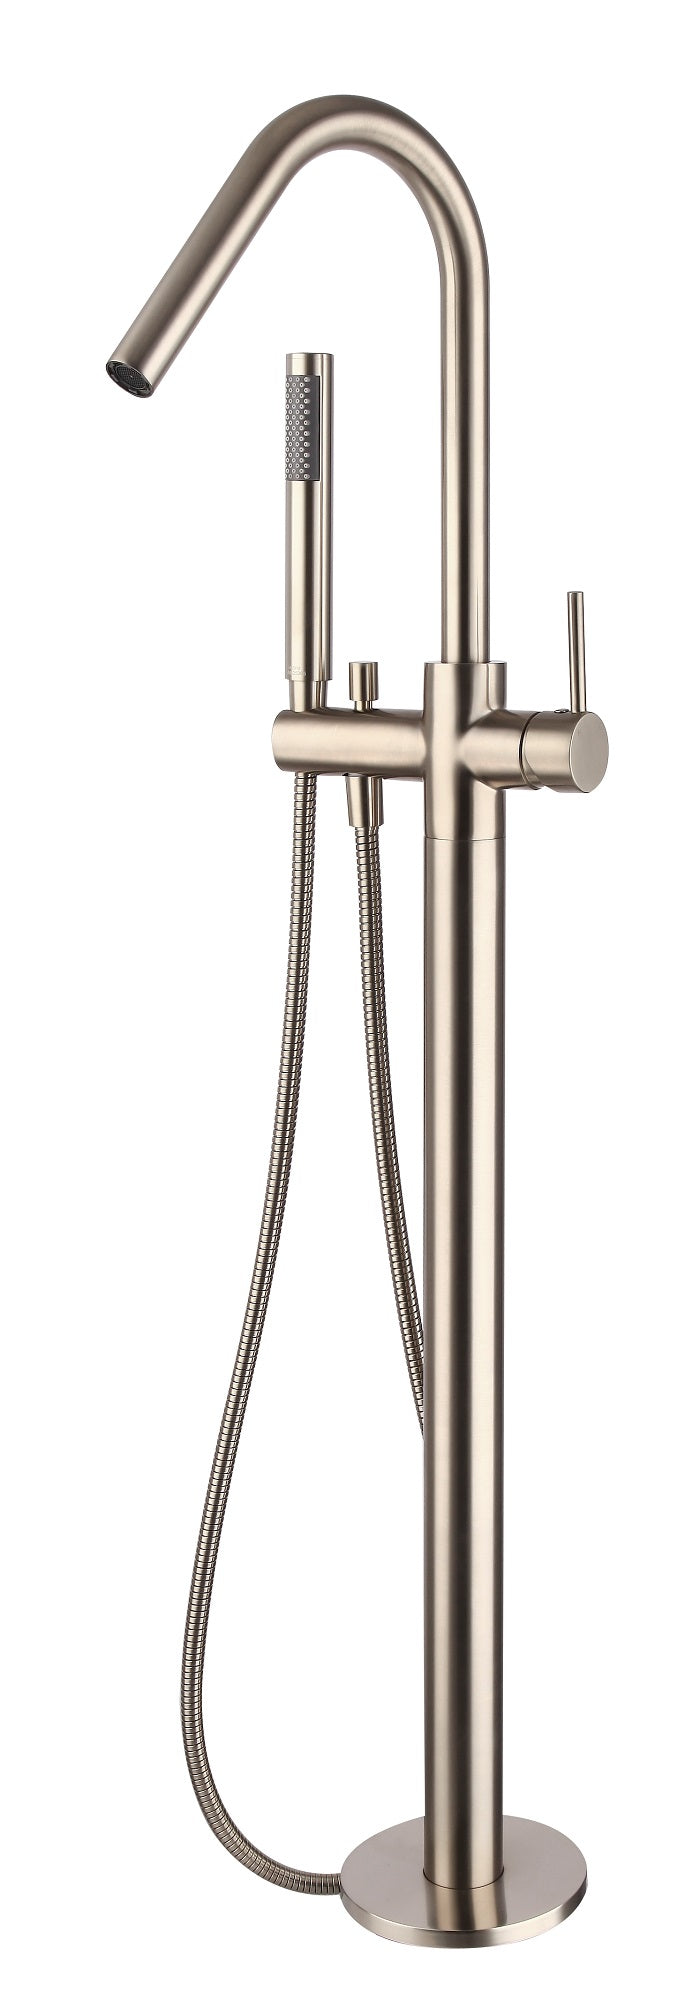 Modern National Star Mini Freestanding Bath Mixer with Hand Shower Brushed Nickel STRM012BN